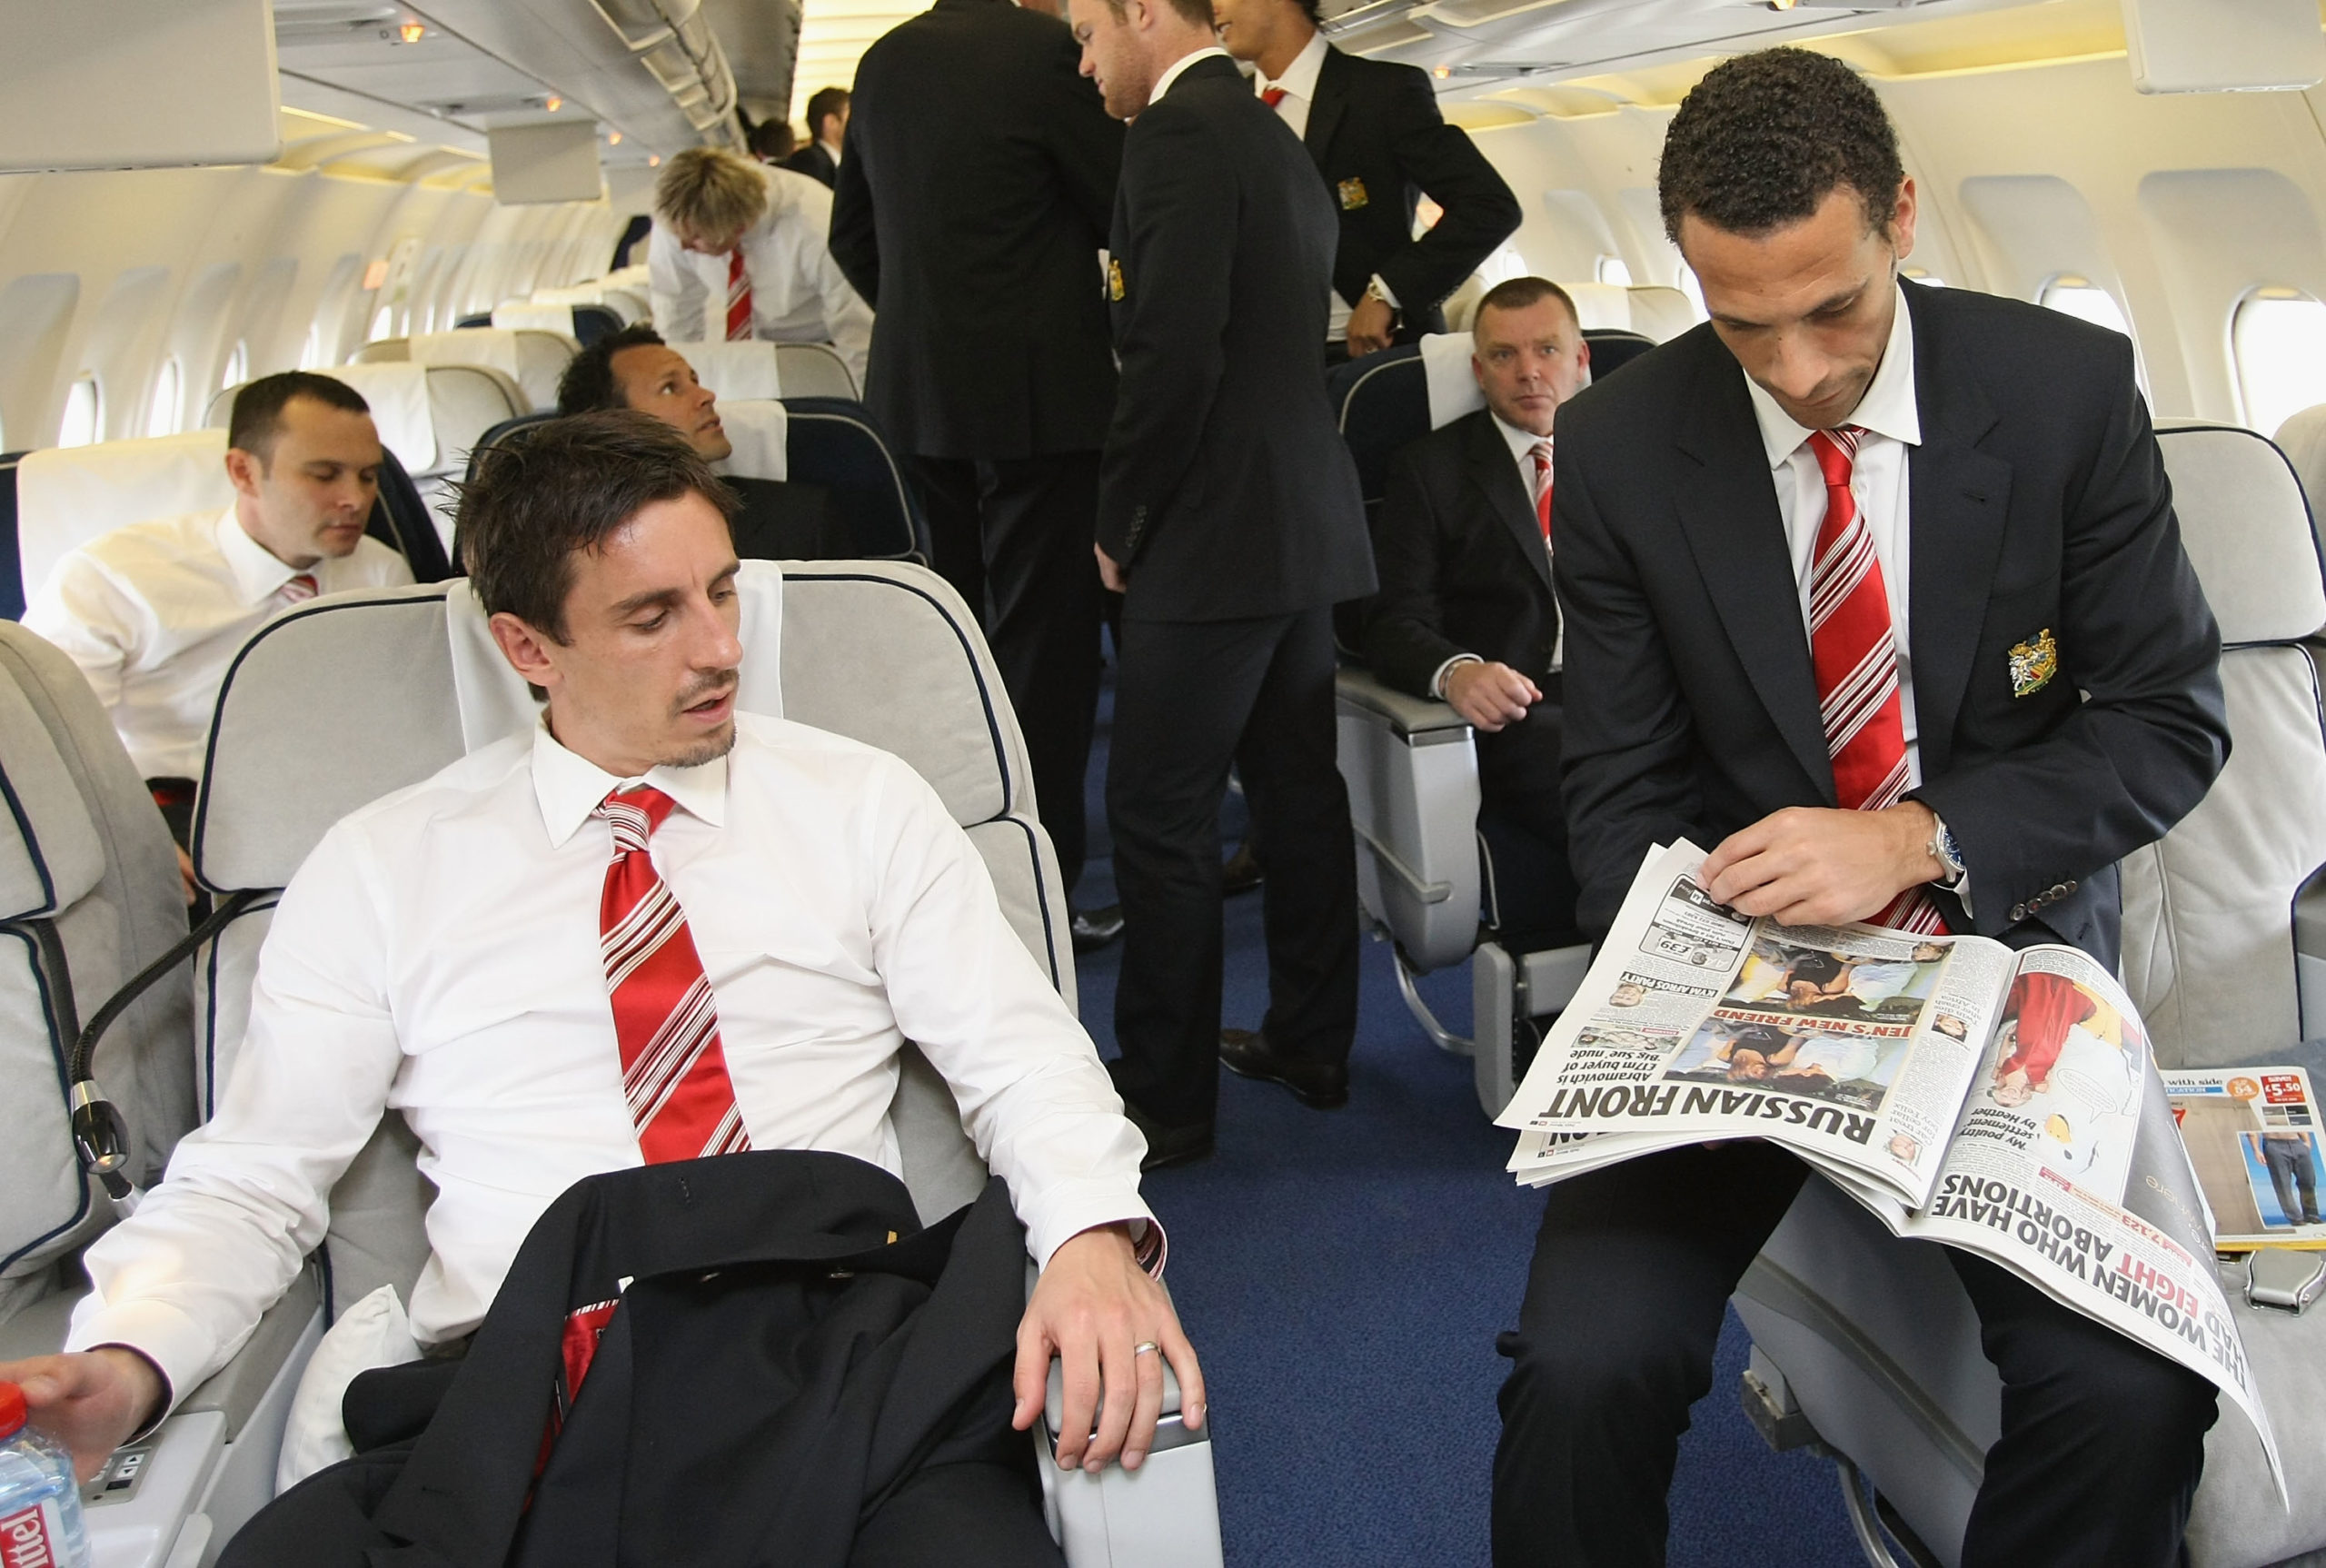 Manchester United depart for UEFA Champions League Final